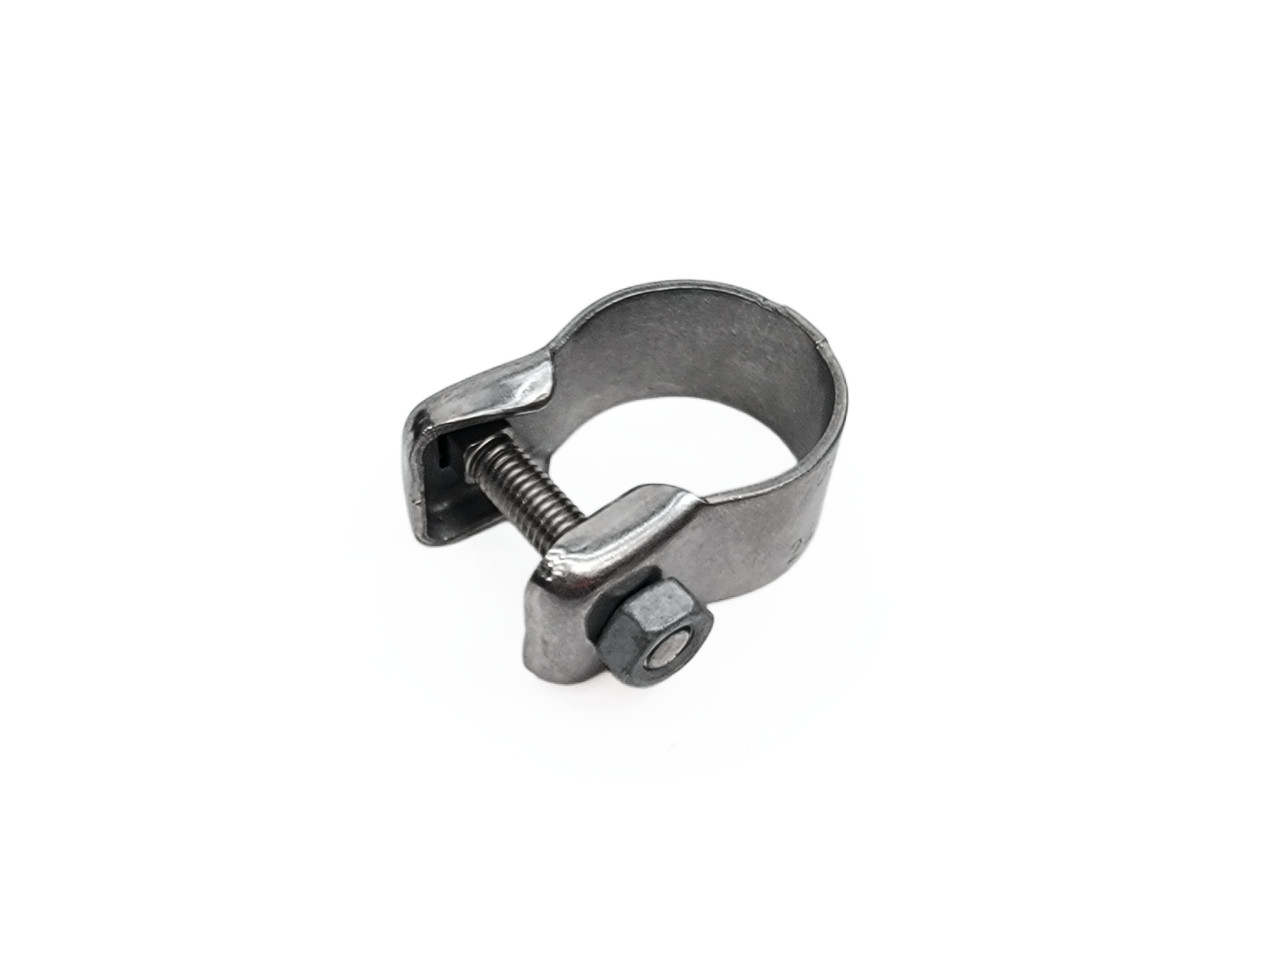 Webasto Exhaust Clamp for 24mm 26mm Exhaust hose